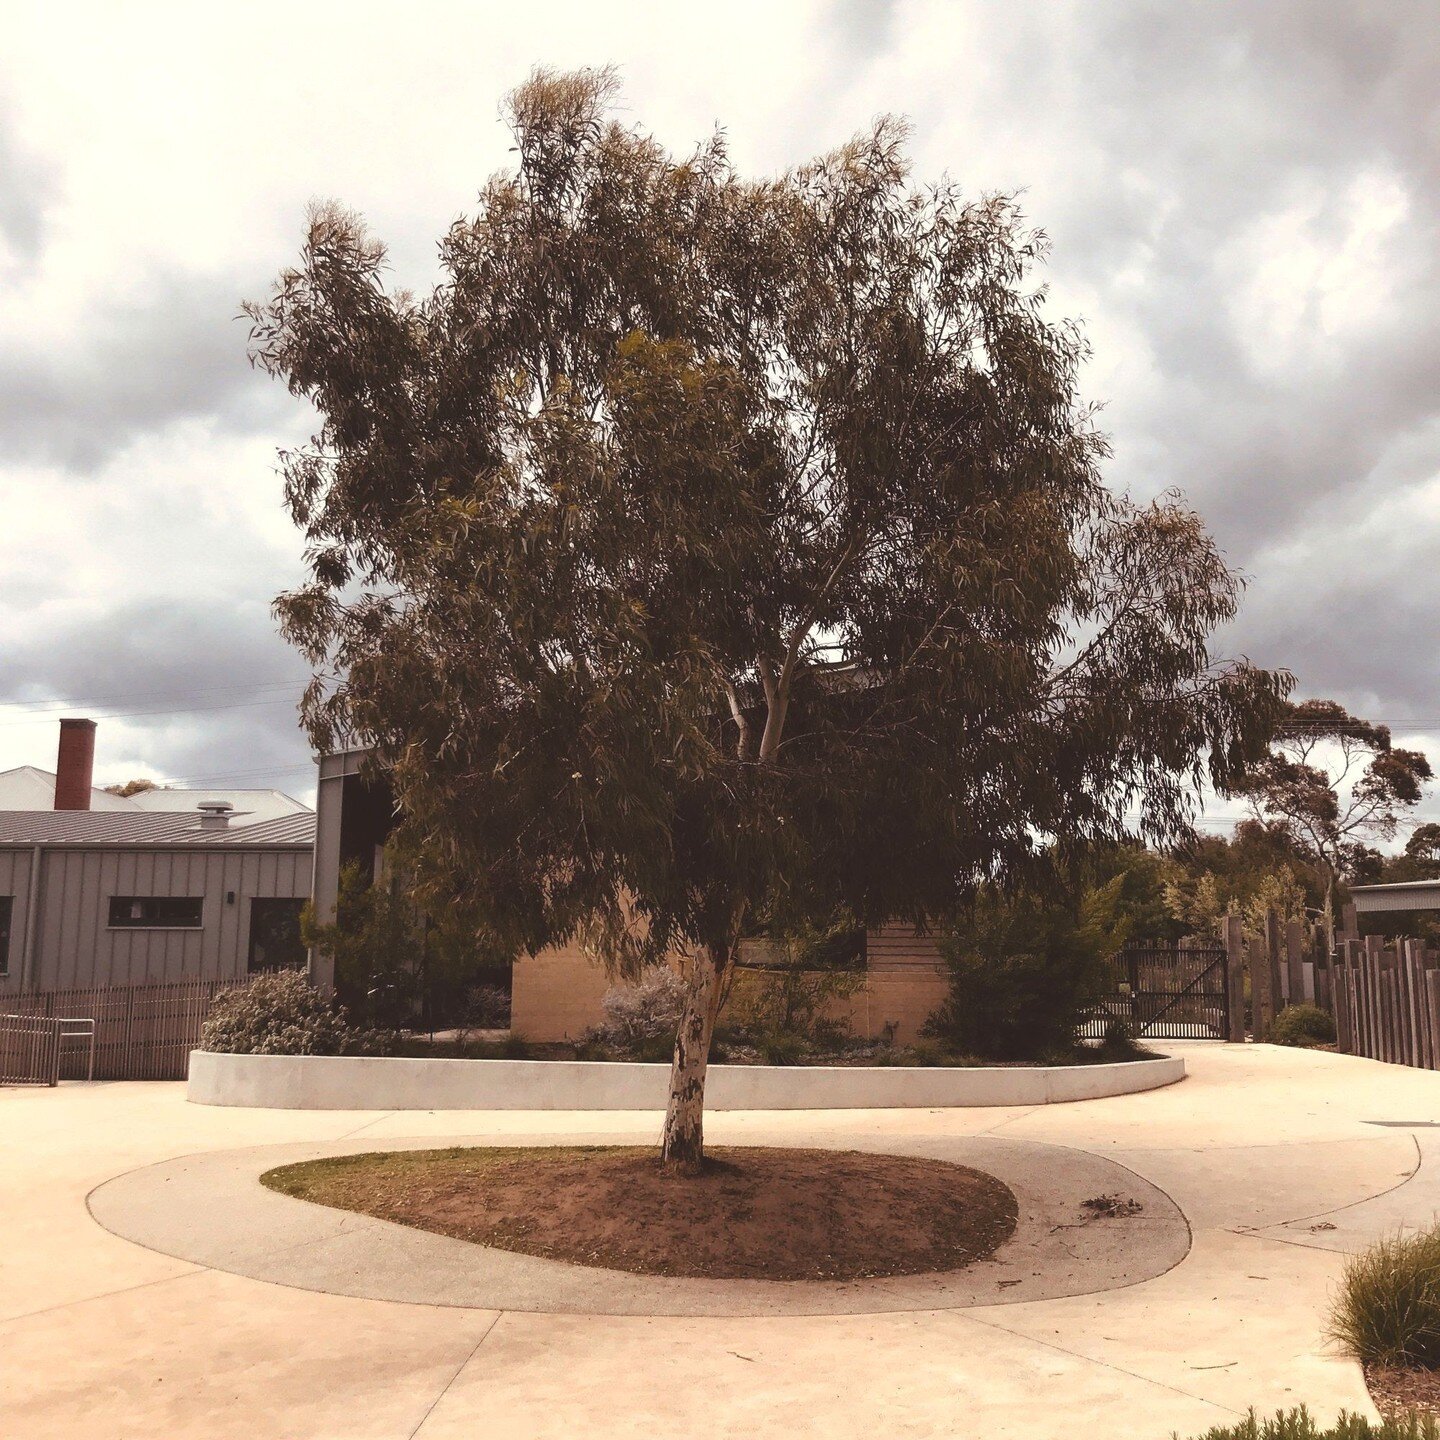 Beautiful landscaping elements from the original landscaping project at Mary Mackillop Primary School. Creates such a great space for students to play and immerse themselves in. I love it; shoutout to the crew who created this beautiful space.